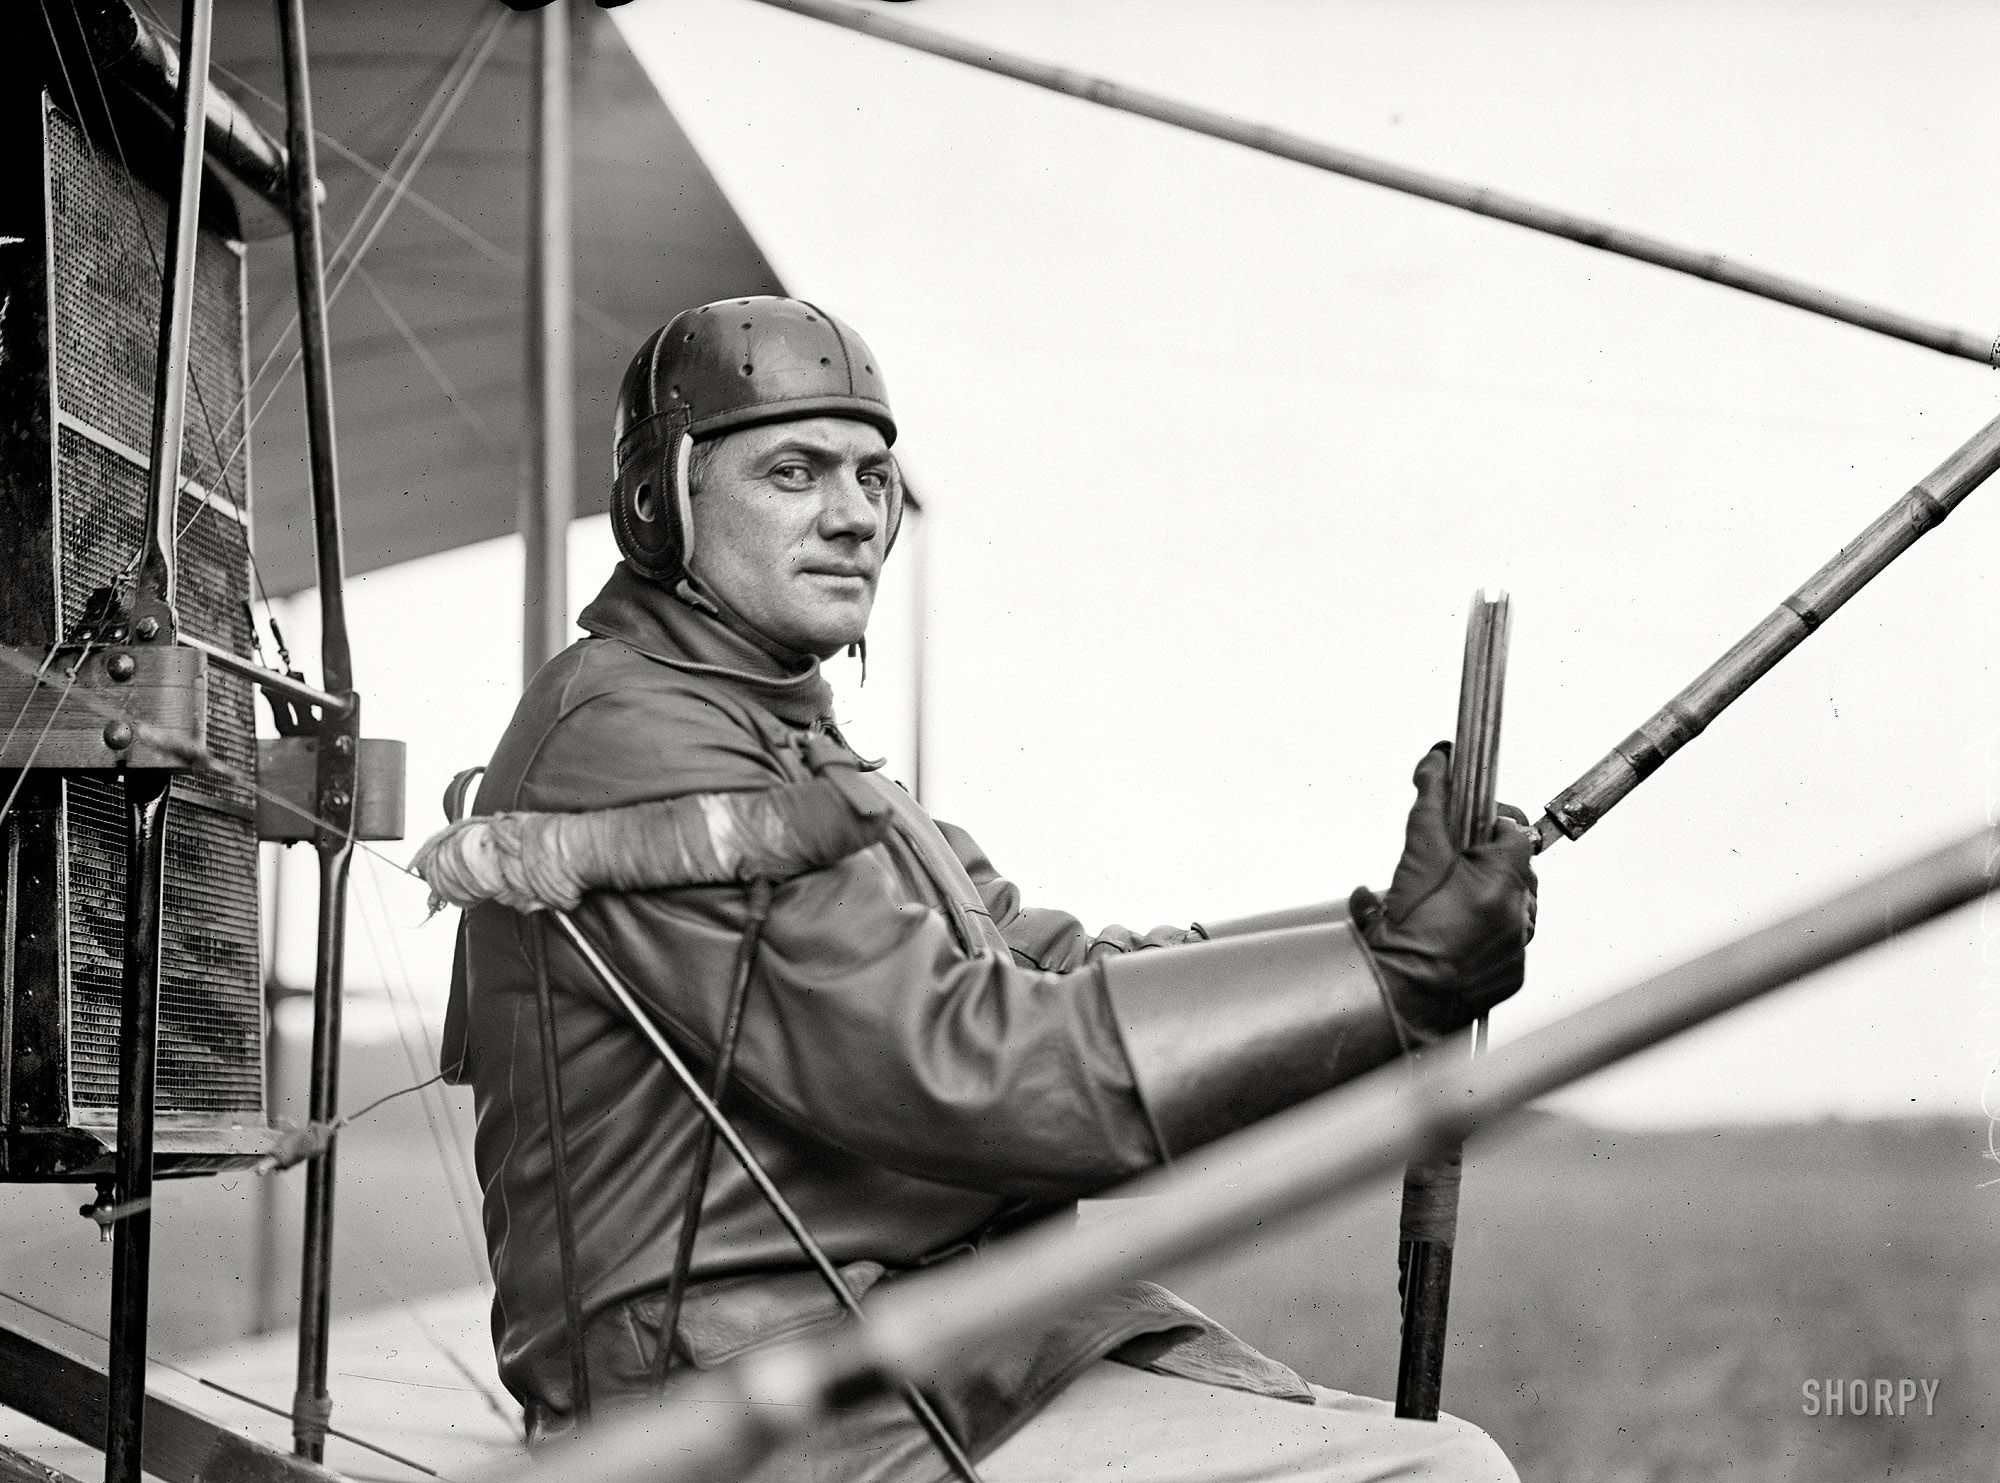 College Park, Maryland, 1912. "Aviation, Army. College Park aviation field, 2nd season. Capt. F.B. Hennessy, Curtiss plane." Harris & Ewing. View full size.